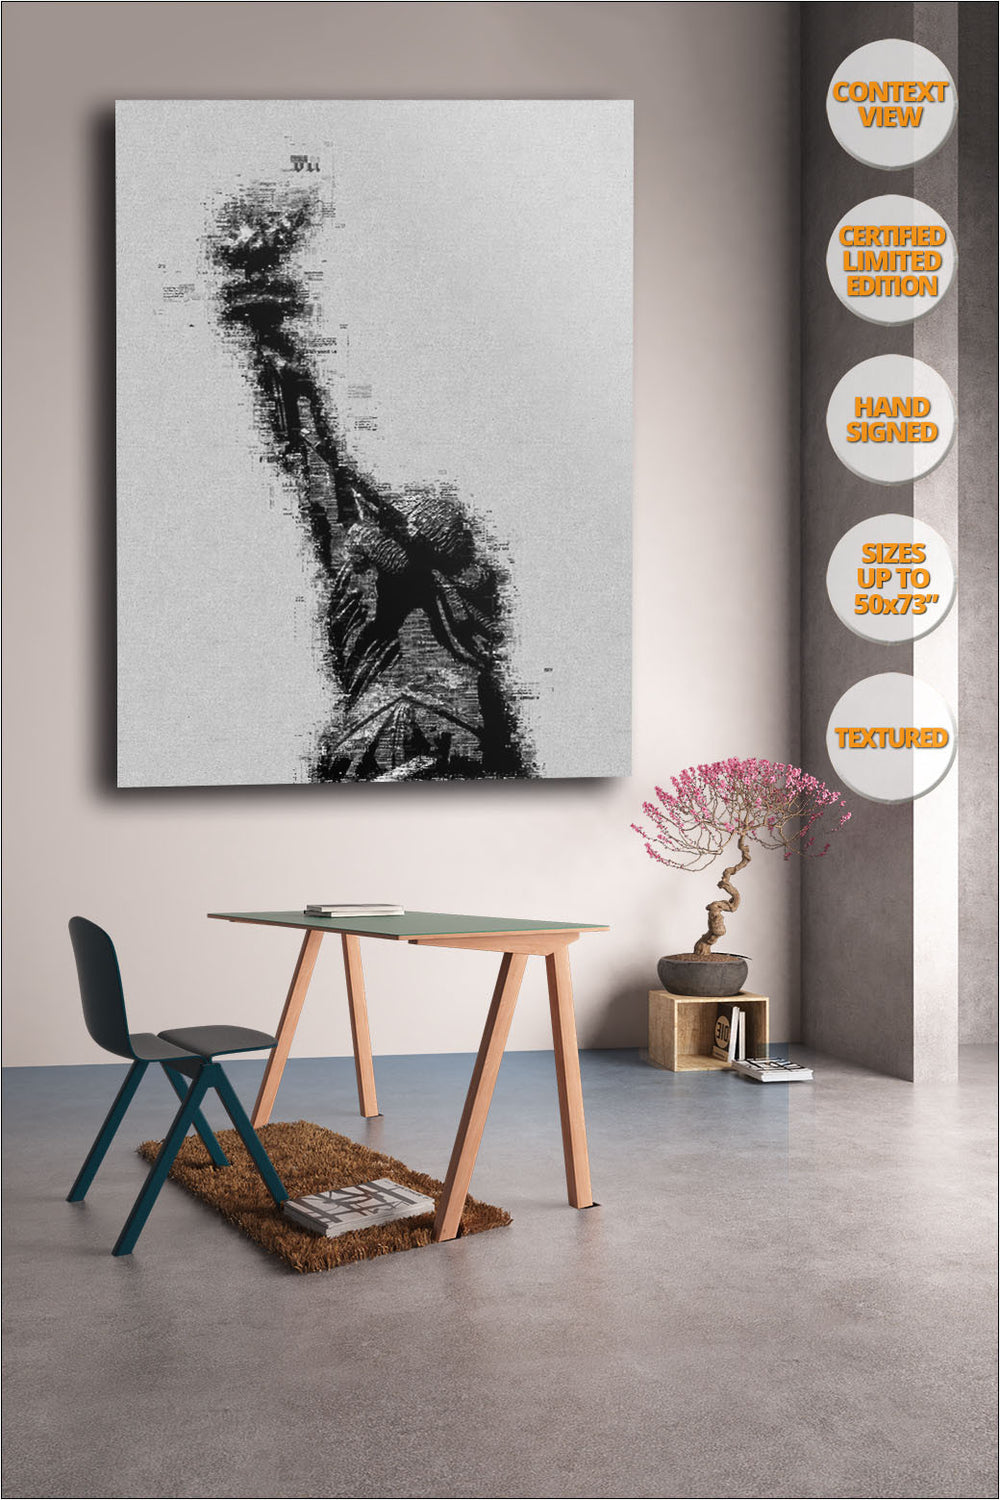 The Statue of Liberty, Manhattan, New York. | Print hanged in bedroom.